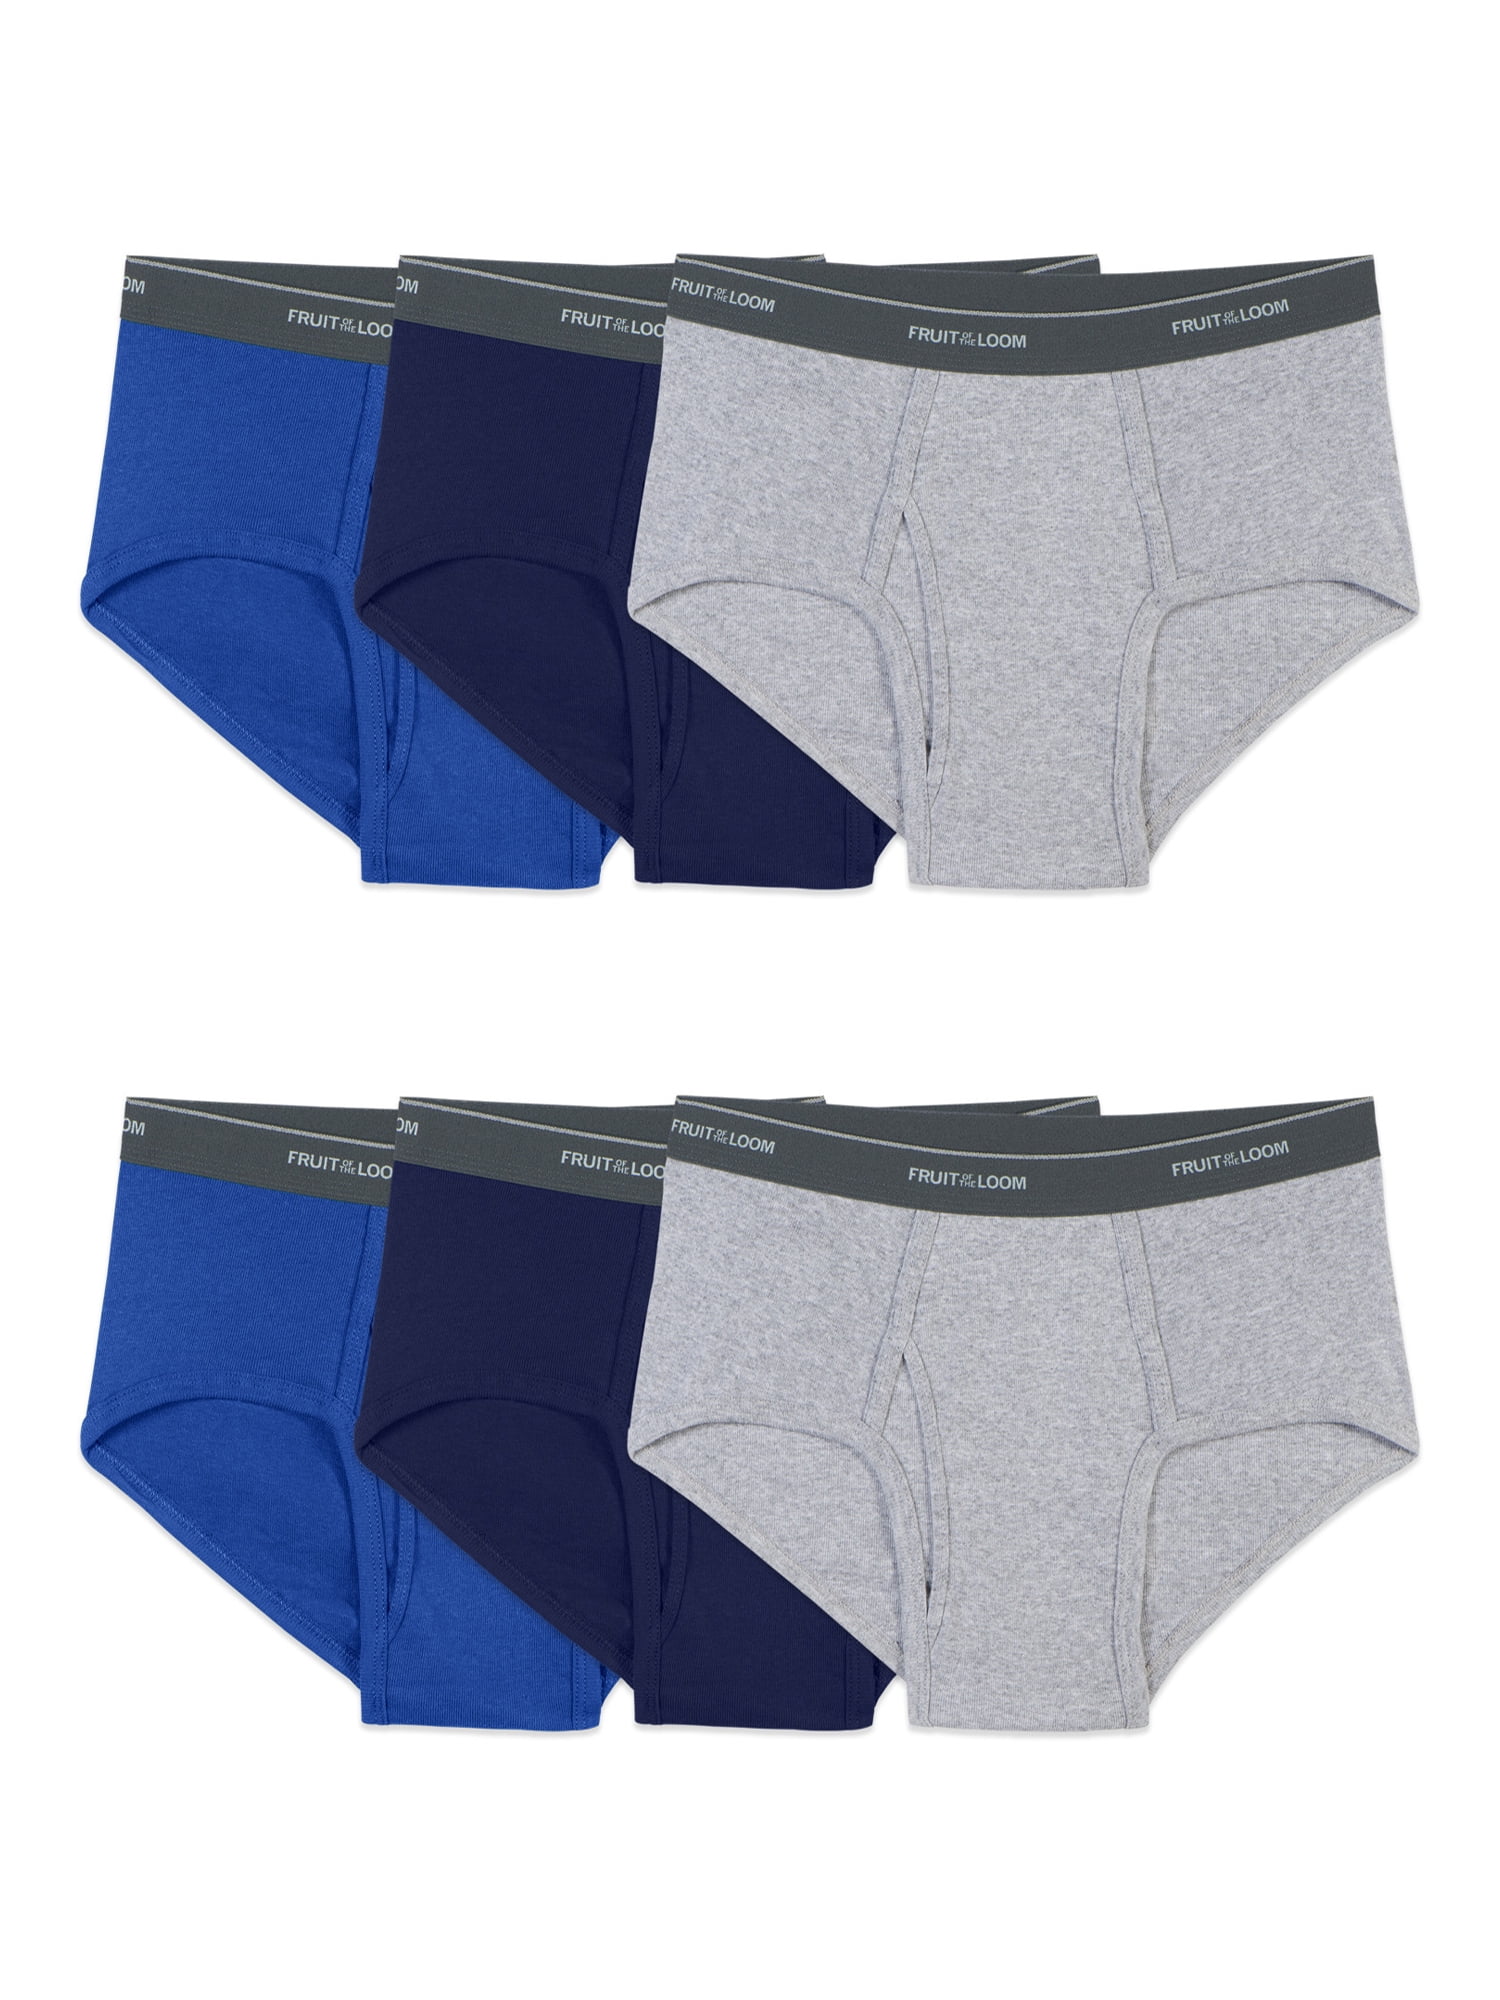 Fruit of the Loom Men's Fashion Briefs, 6 Pack 